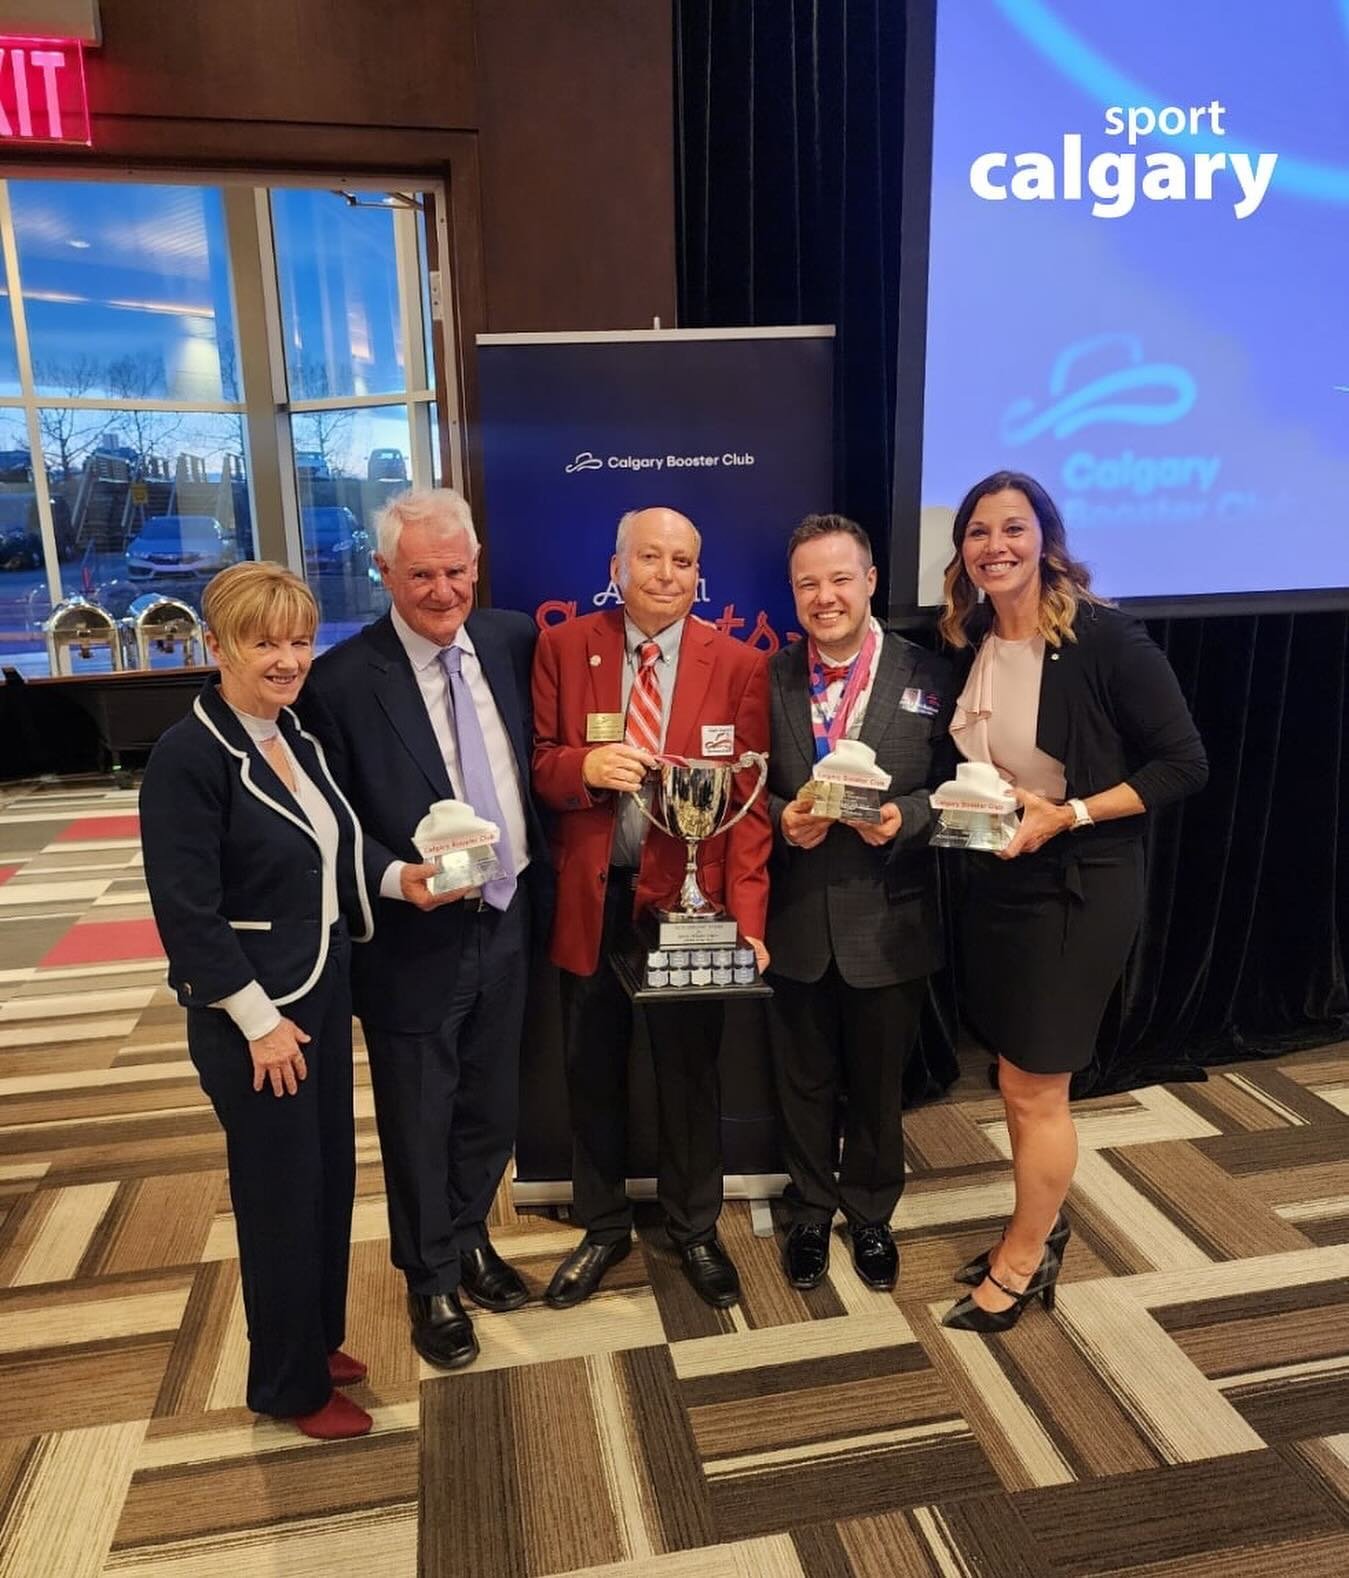 Thank you to the @calgaryboosterclub for having us on Sunday at their Annual Sports Gala - Celebrating 70 Years! Our President and CEO, @catrionald was selected to receive one of the &lsquo;Honoured Athletic Leaders&rsquo; Awards.